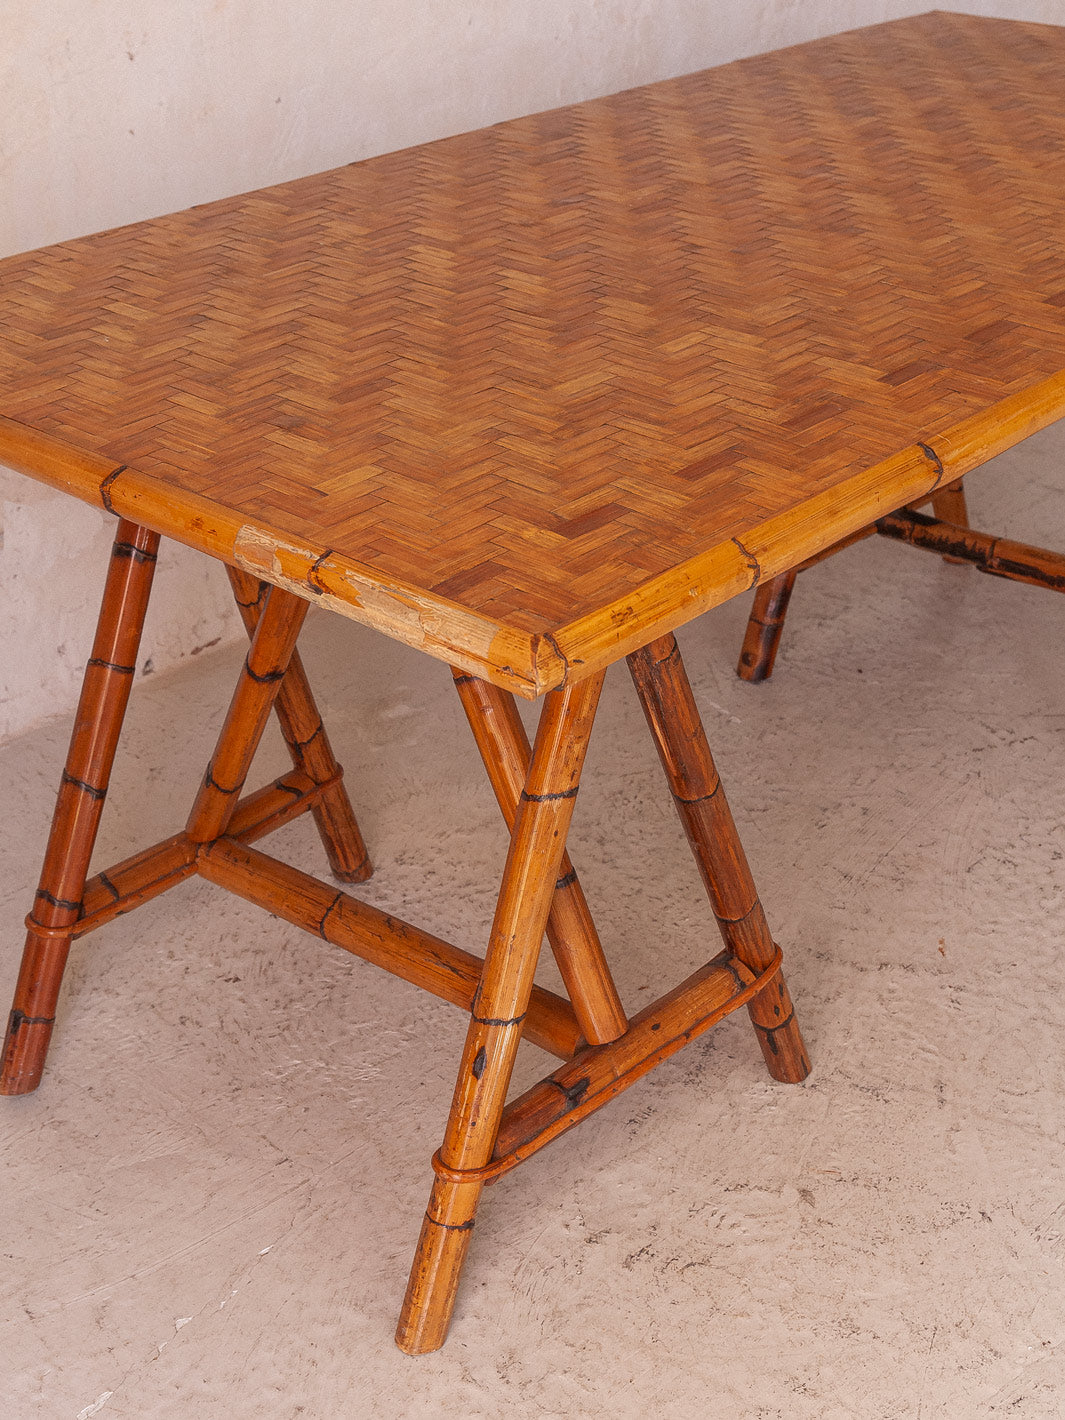 Original bamboo dining table from Italy from the 60s